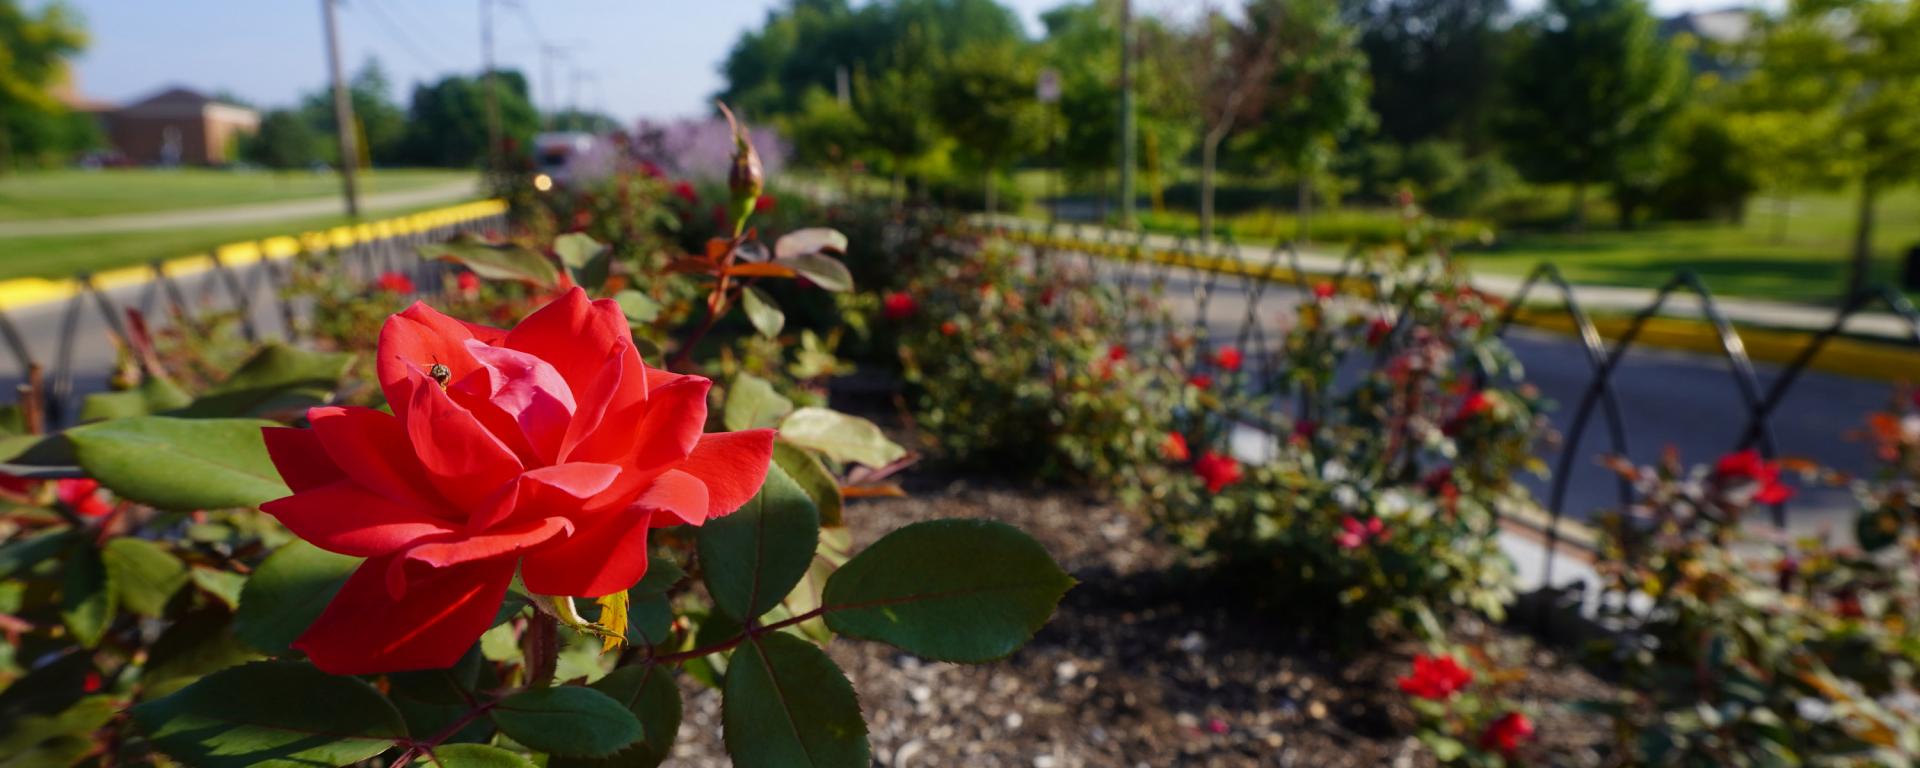 red rose planted in median of street